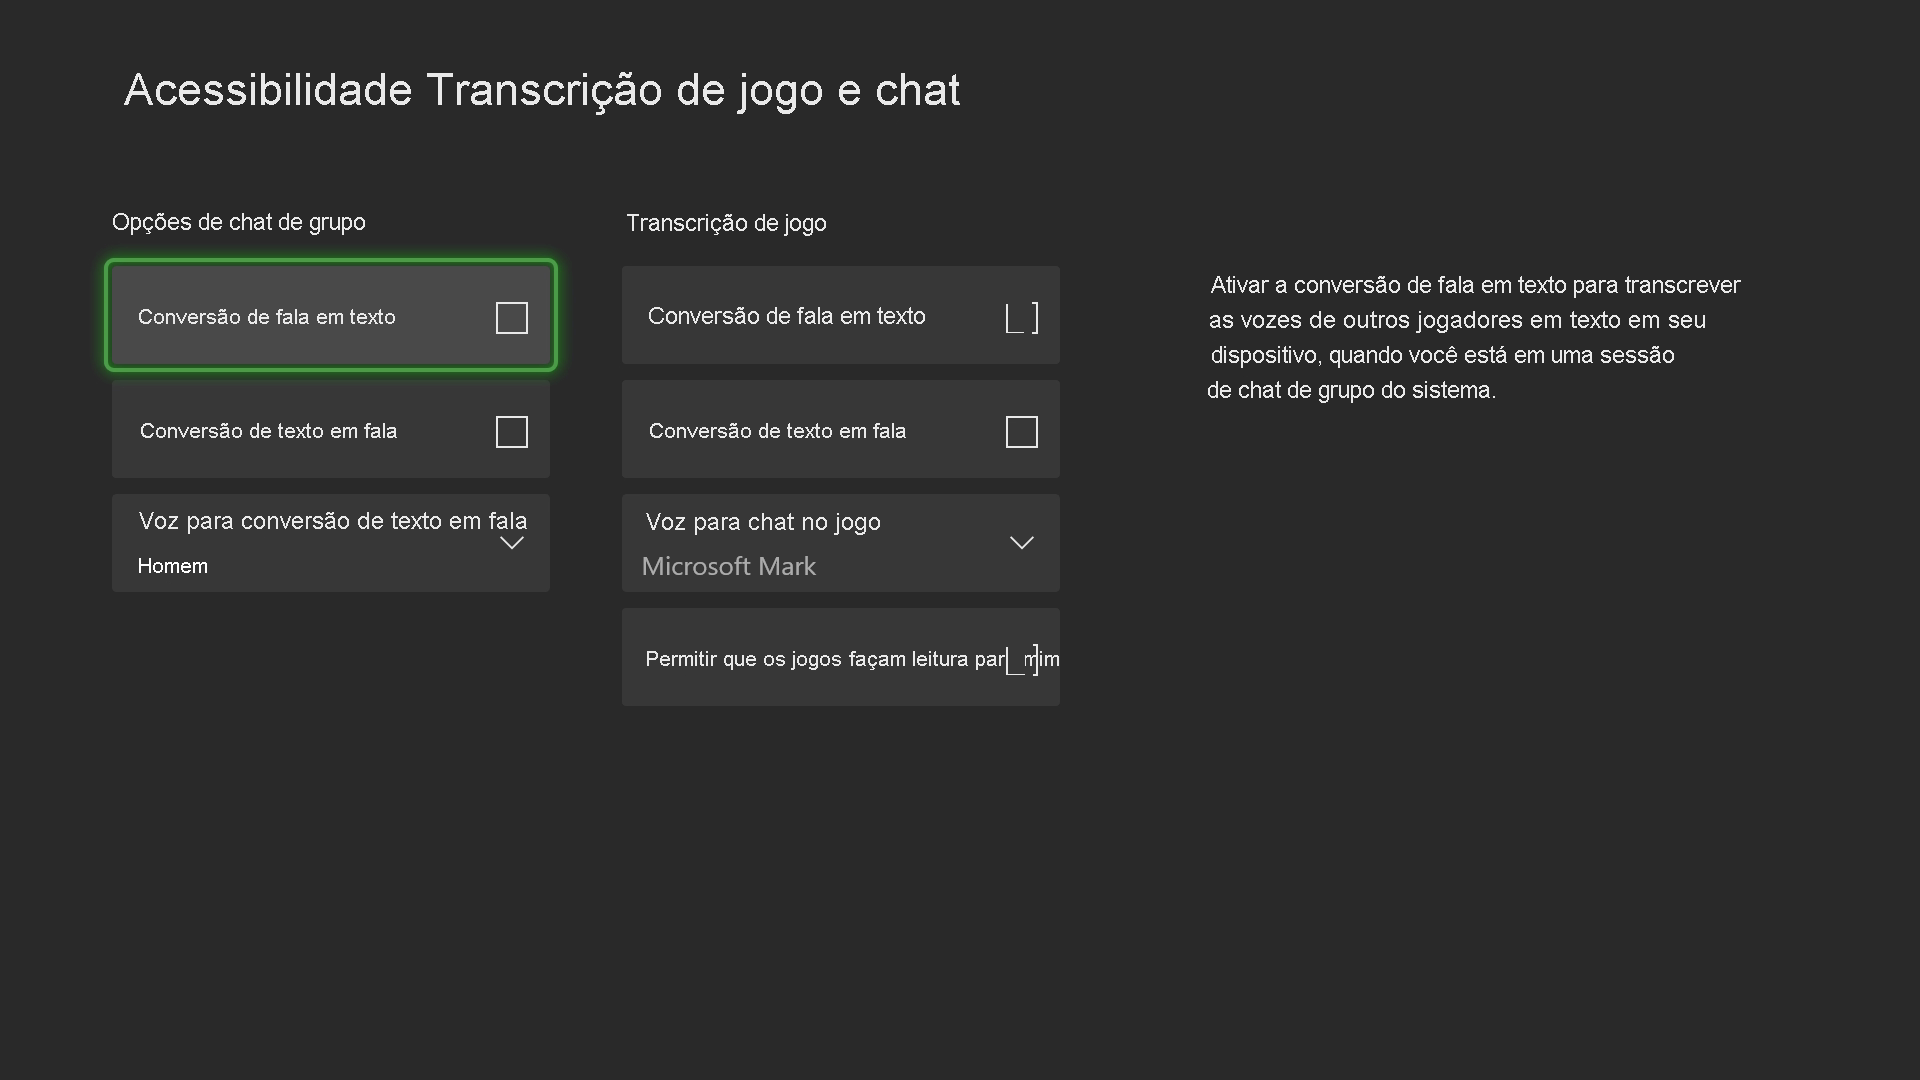 A screenshot that shows the Xbox Accessibility Game and chat transcription settings. Two columns of settings are shown. The left column of settings is labeled Party chat options. Underneath are two checkboxes: Speech to text and Text to speech. A list box is labeled Text to speech voice: Guy. The right column of settings is labeled Game transcription. Underneath are three checkboxes: Speech to text, Text to speech, and Let games read to me. A list box is labeled In-game chat voice: Microsoft Mark. Text on the screen reads: Turn on speech to text to transcribe other players' voices into text on your device, when you are in a system party chat session.